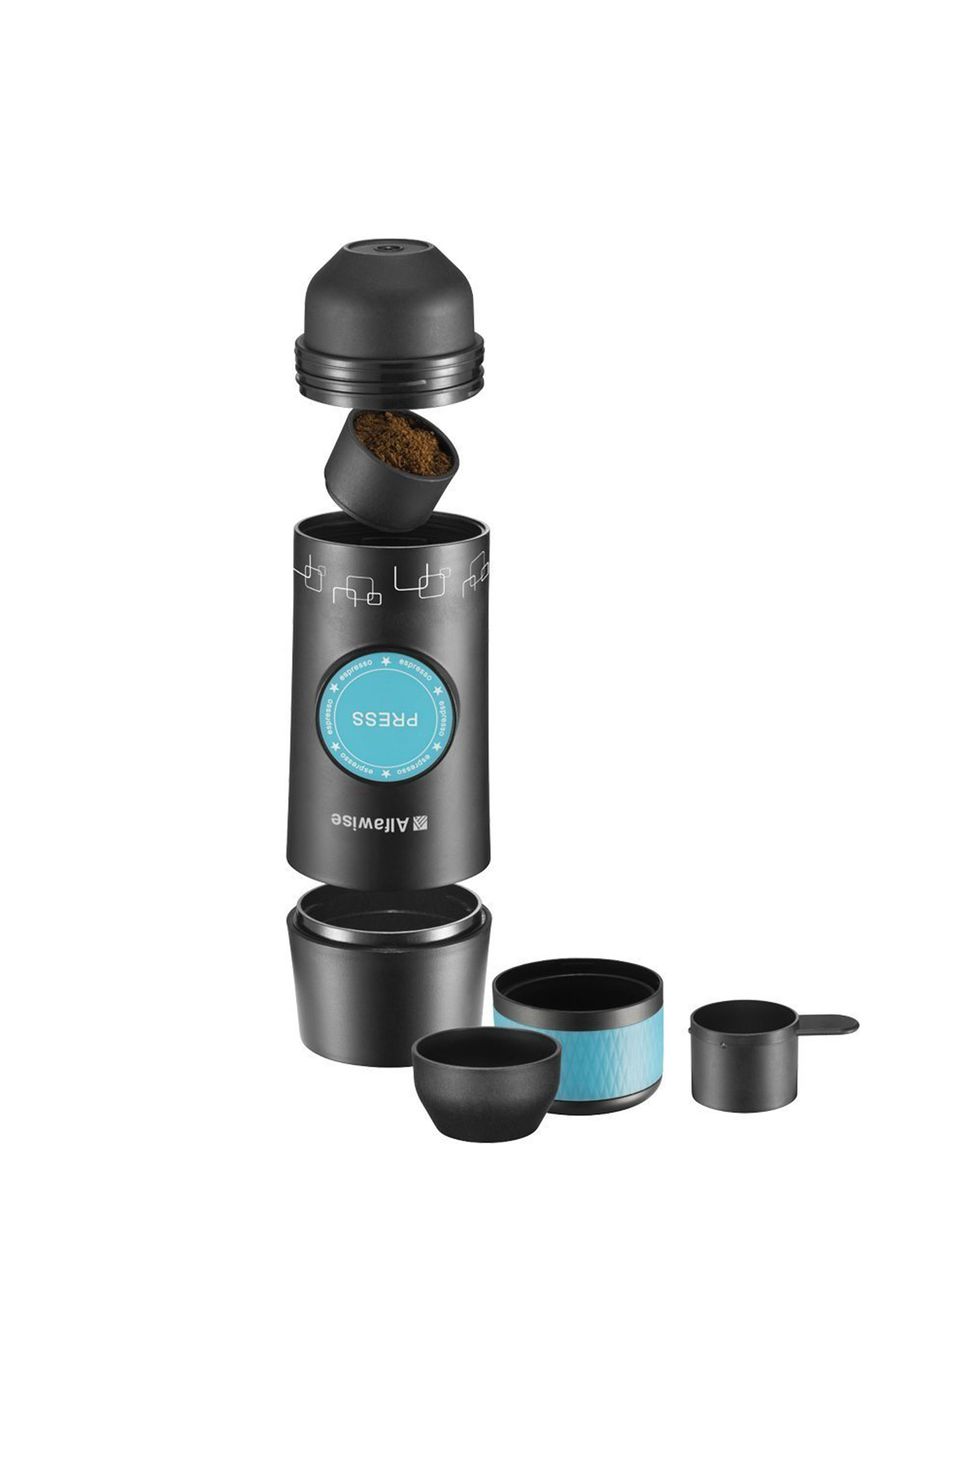 This Camping Espresso Maker Is a Genius Kitchen Space-Saver